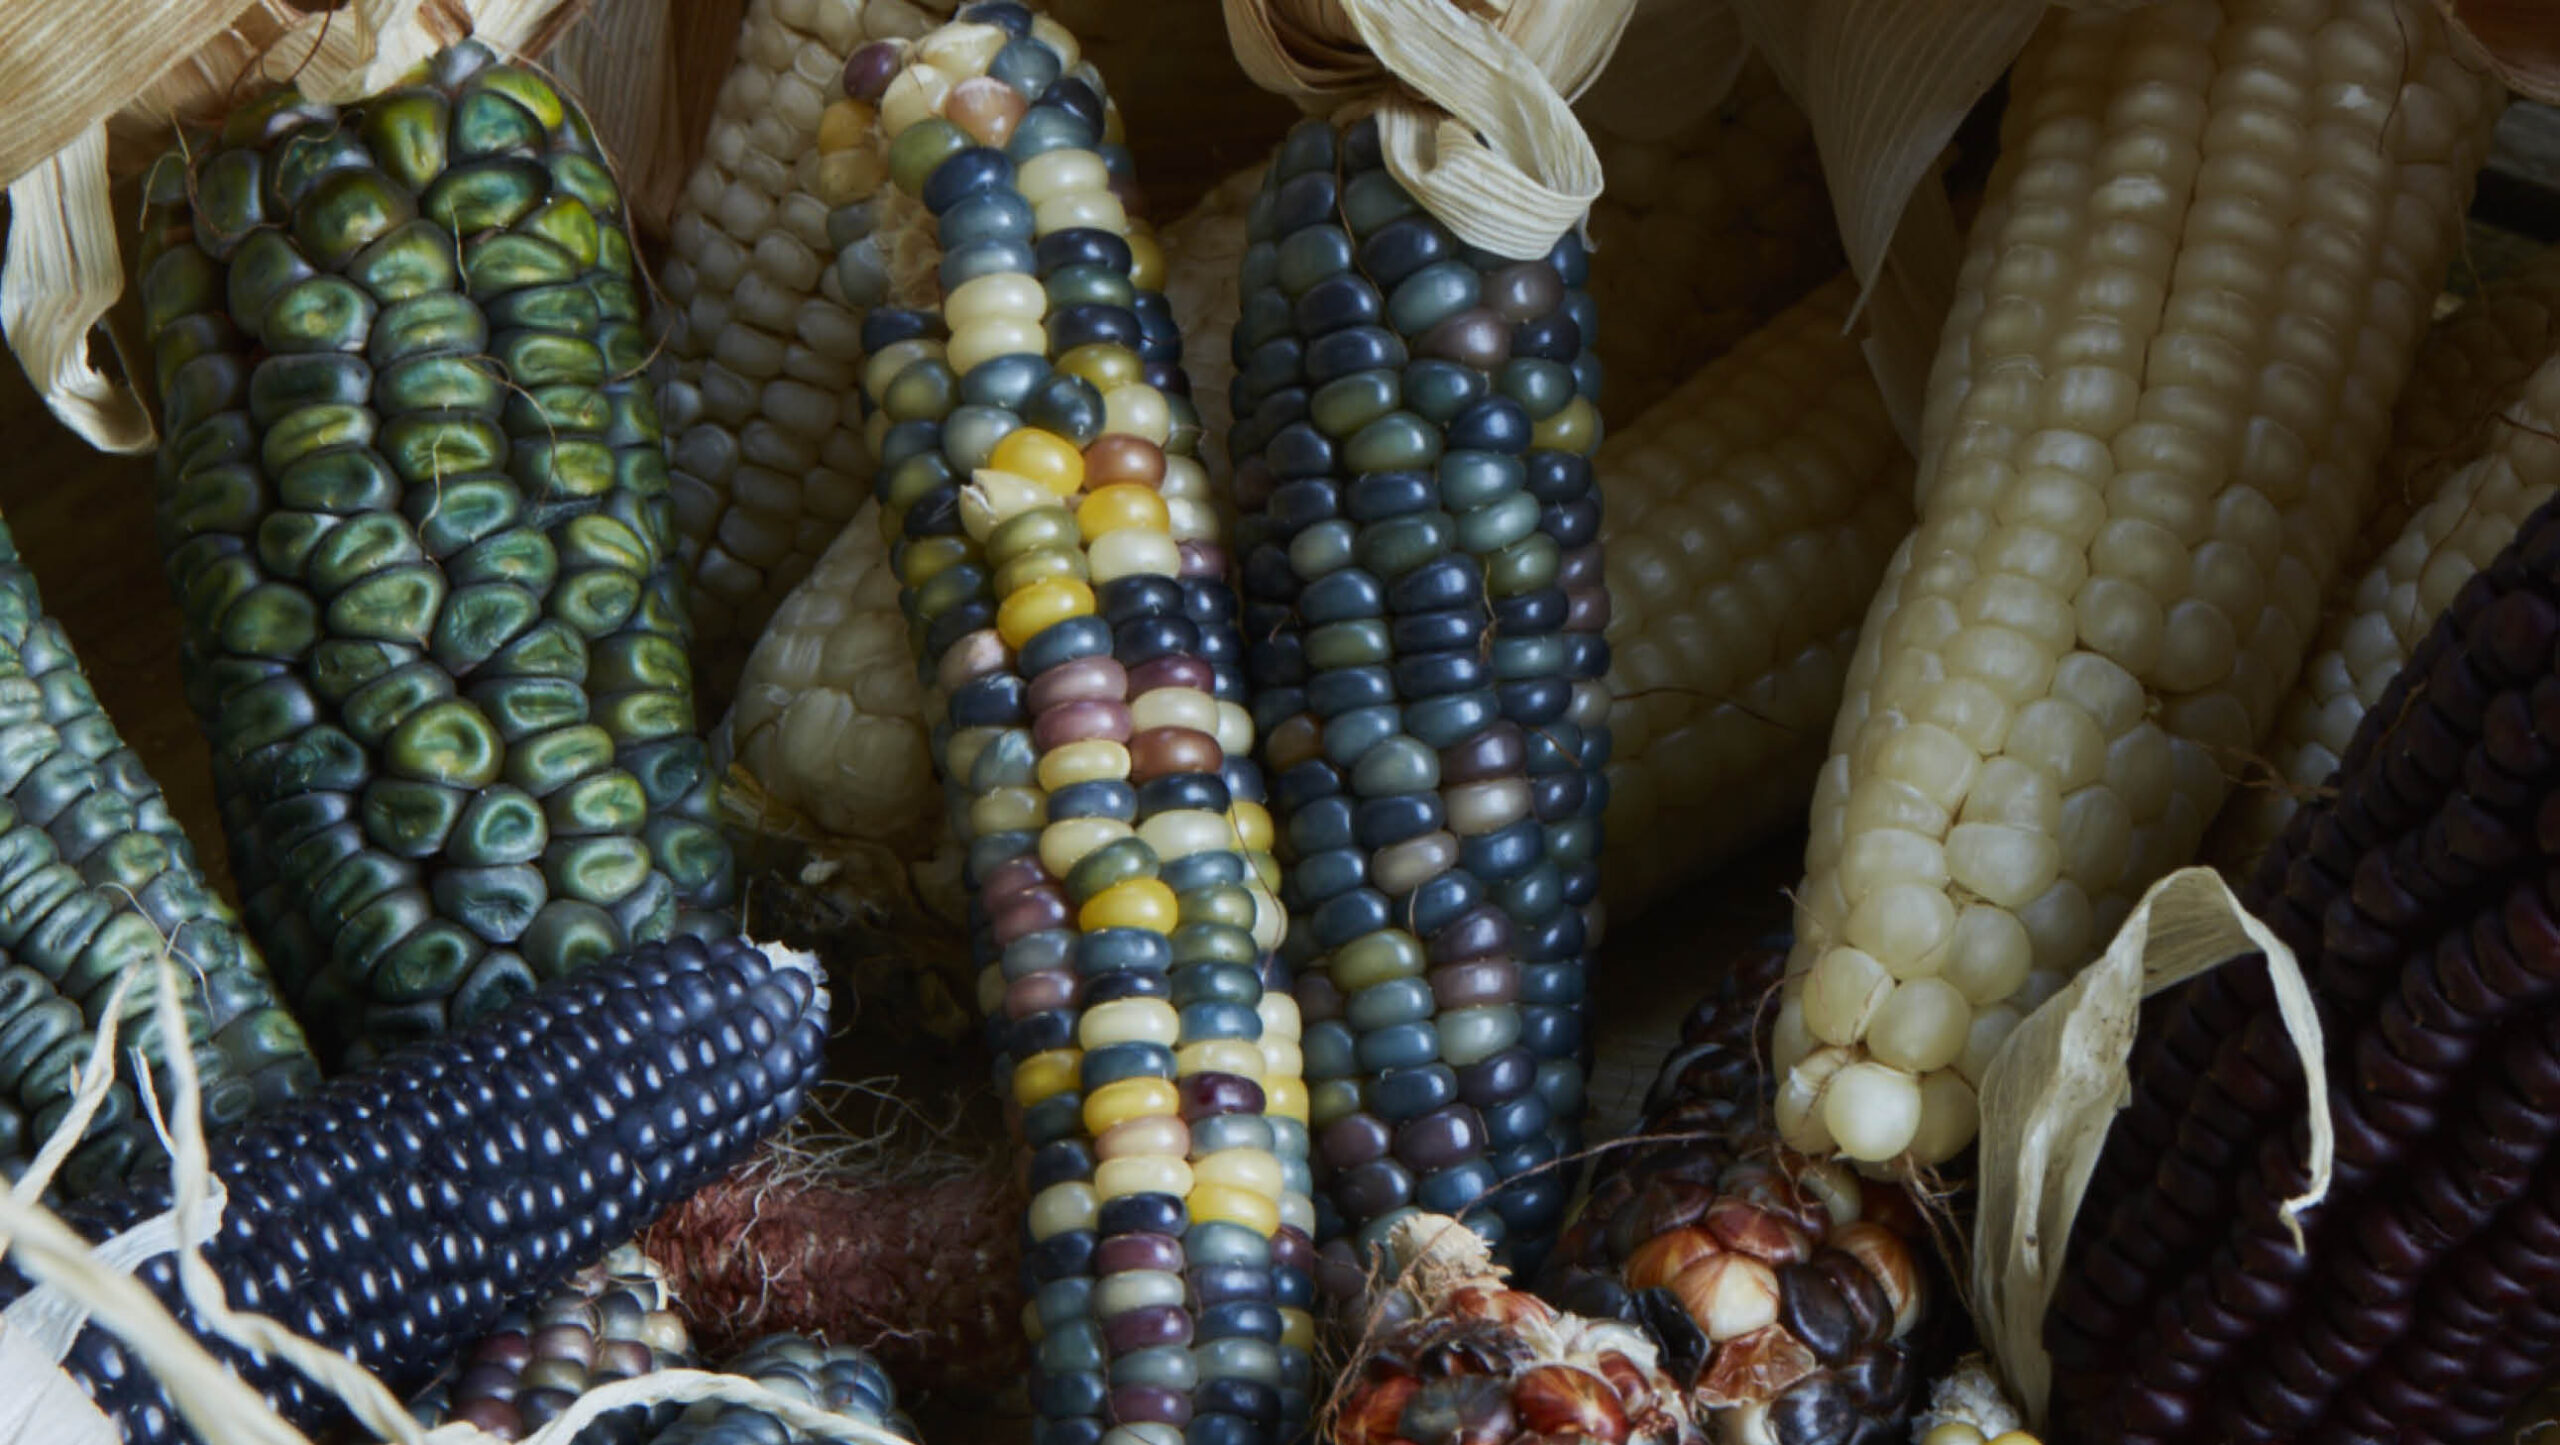 Sow and grow corn during the warmer months.